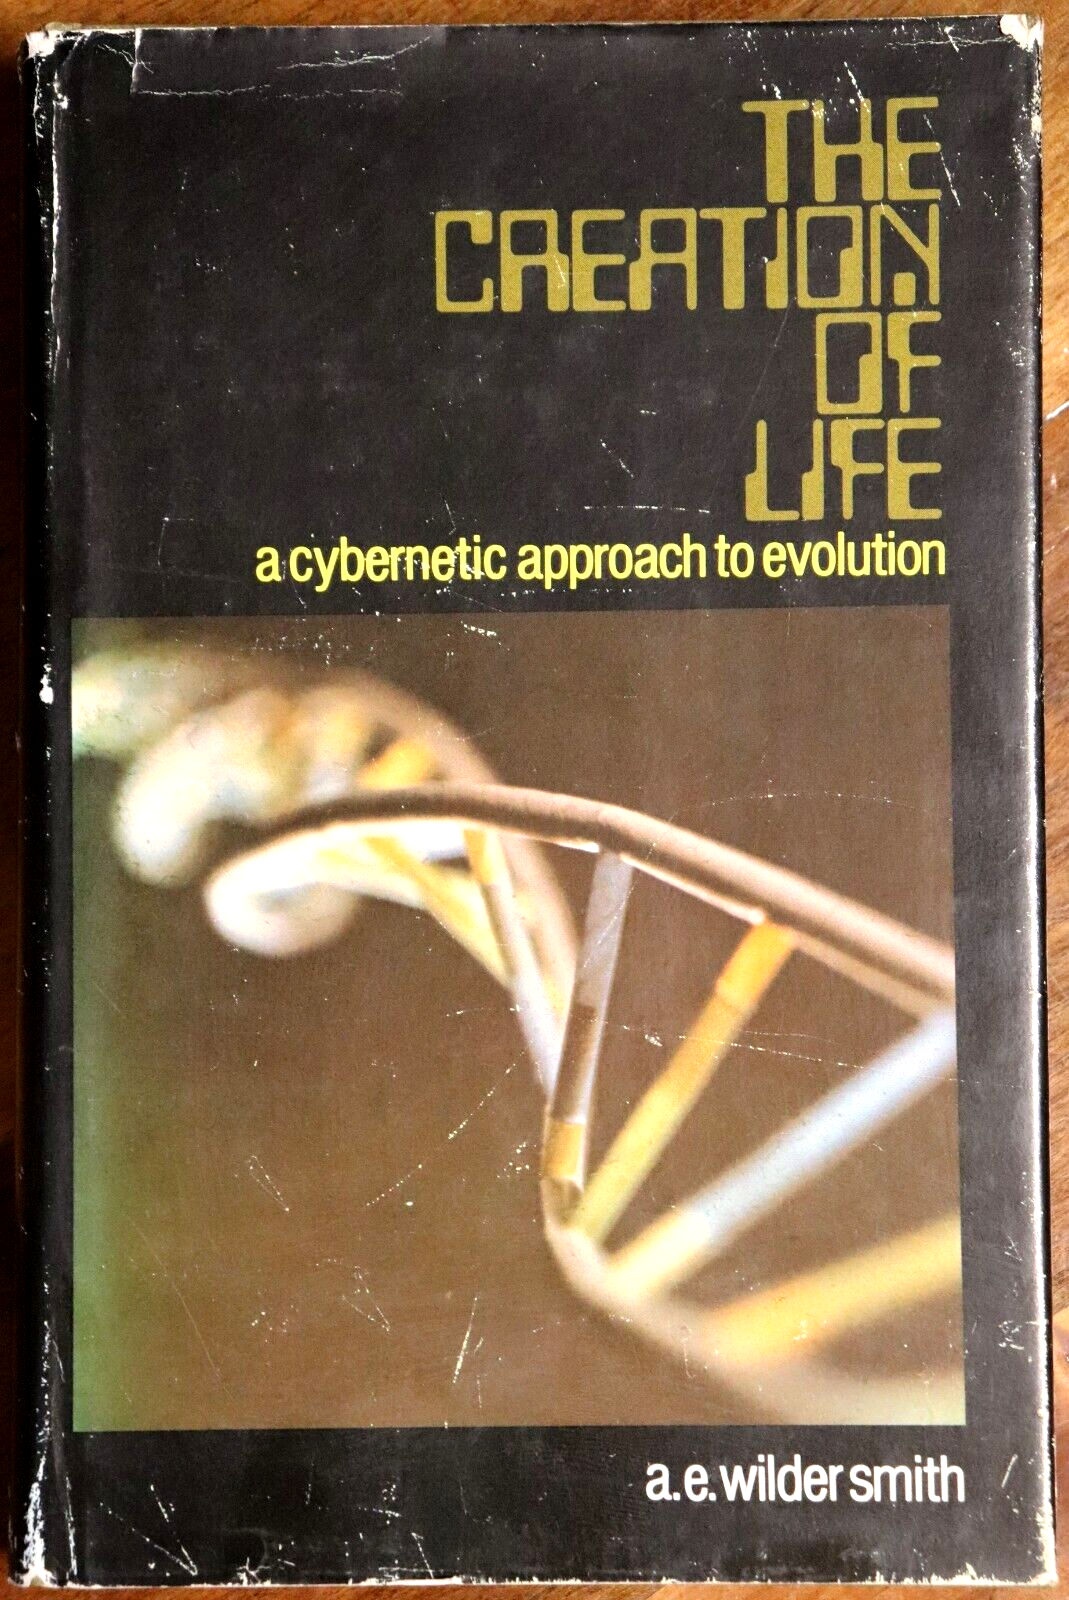 The Creation Of Life by AE Wilder-Smith - 1970 - 1st Edition Science Book